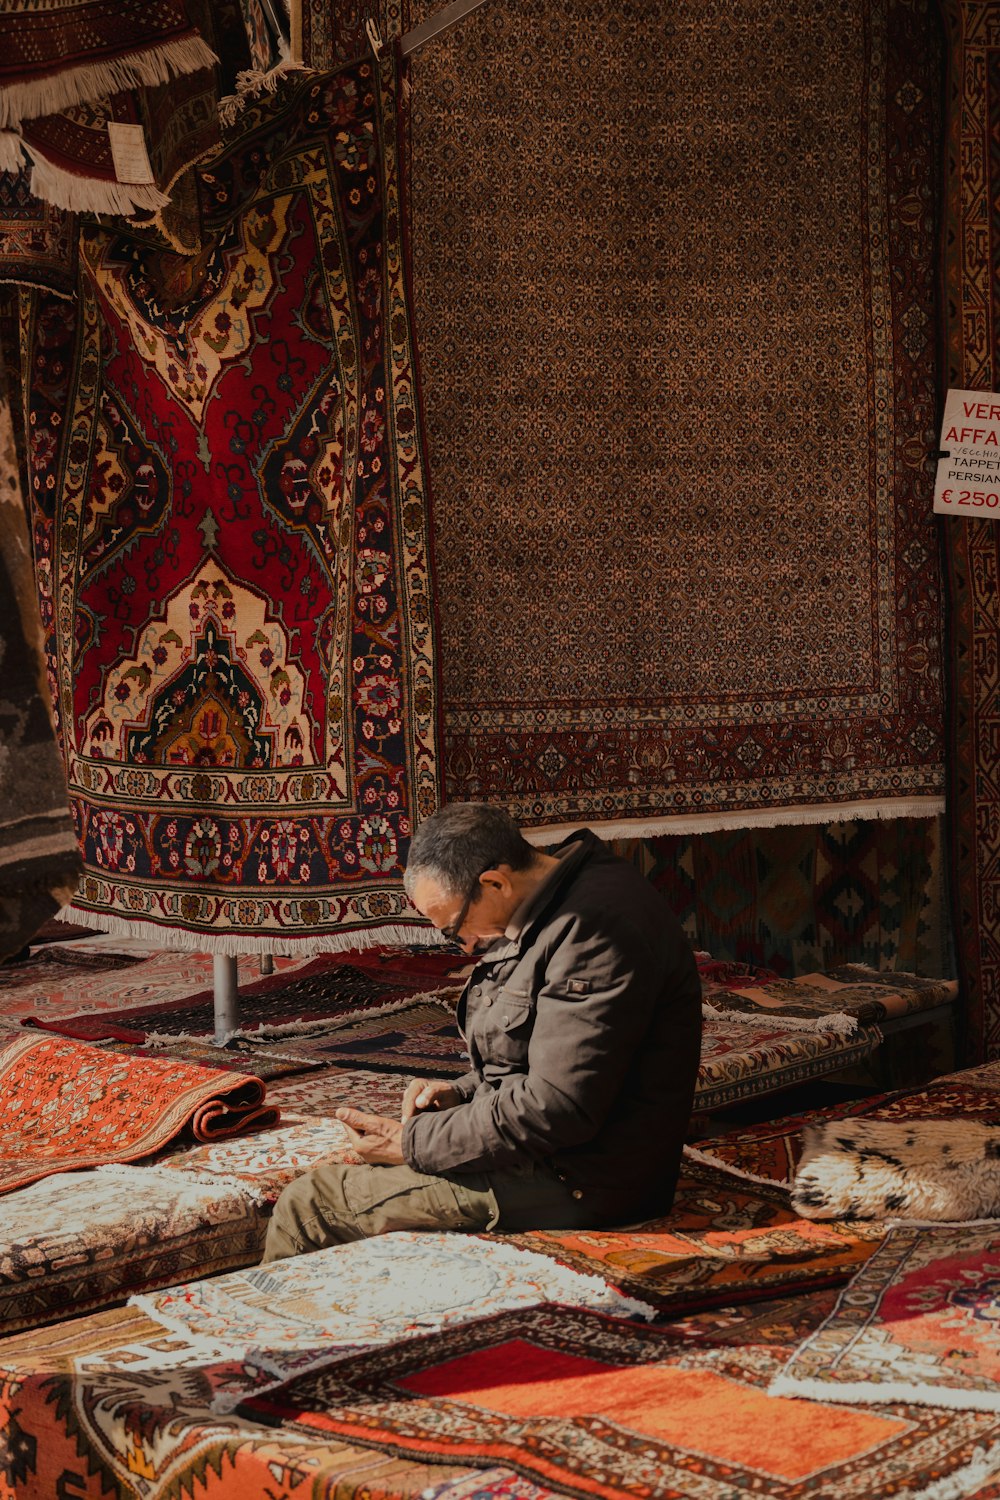 a man sitting on the ground next to a pile of rugs